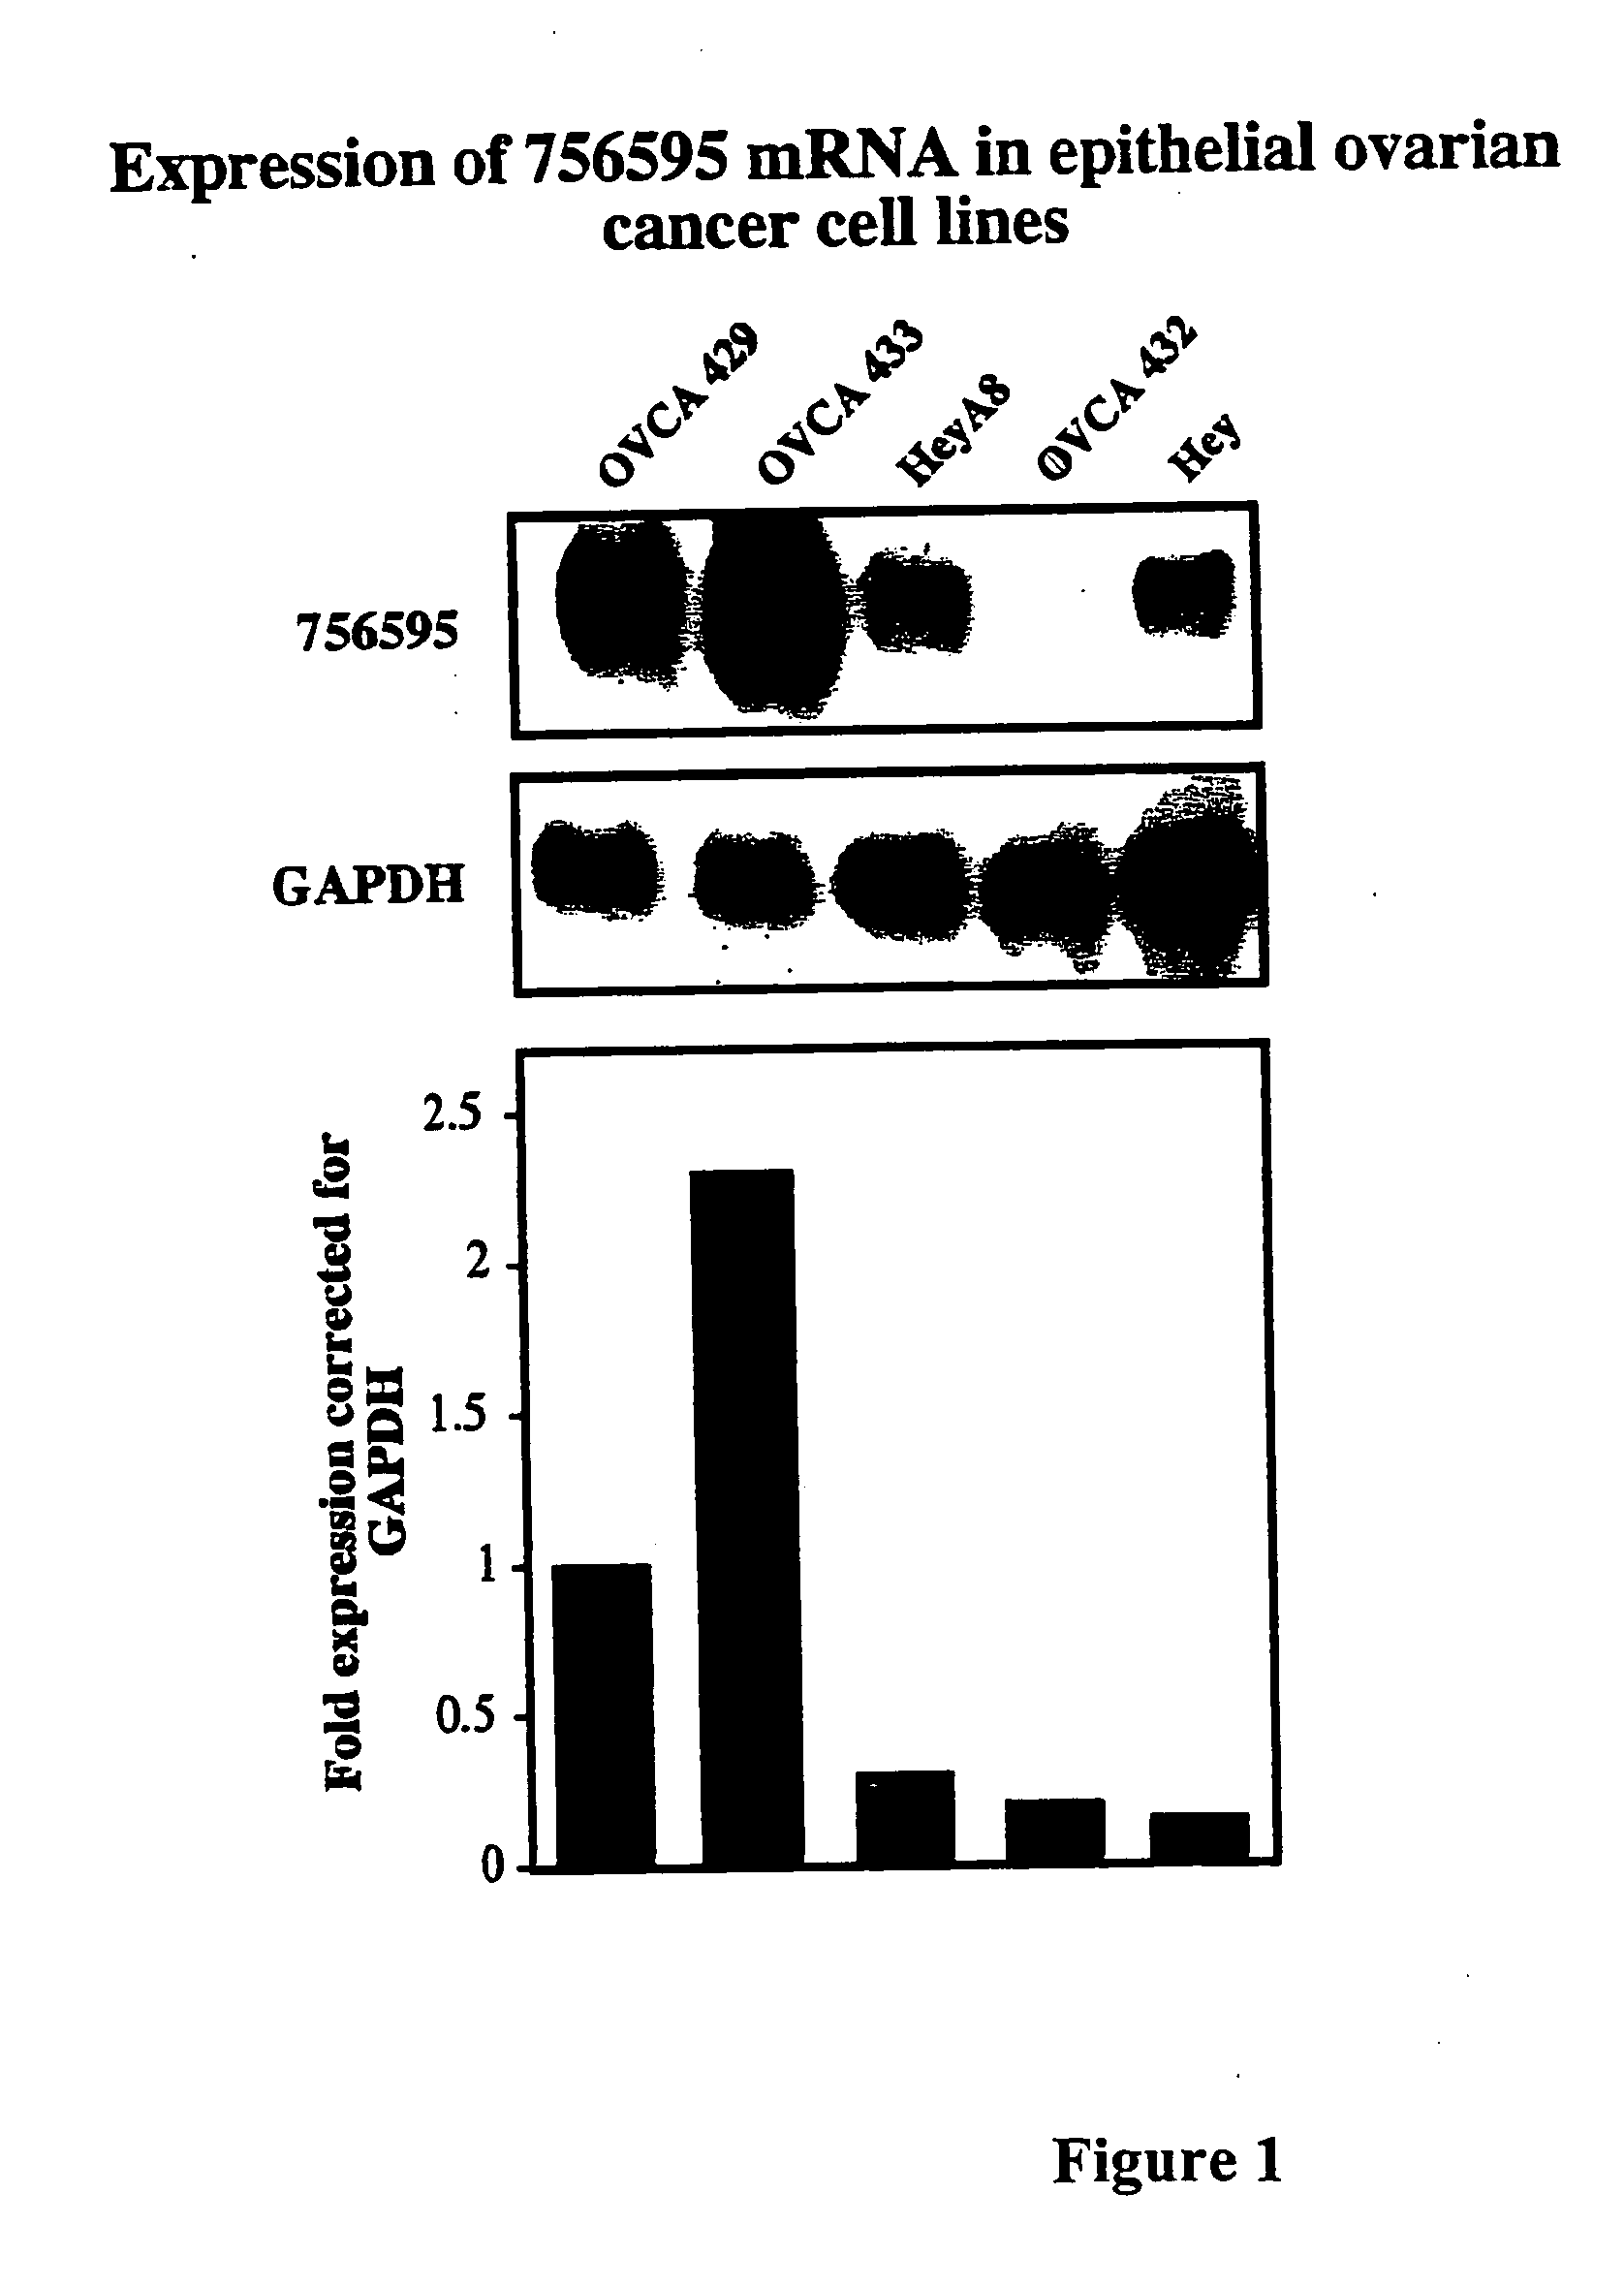 Methods for predicting and overcoming resistance to chemotherapy in ovarian cancer and for predicting colon cancer occurrence